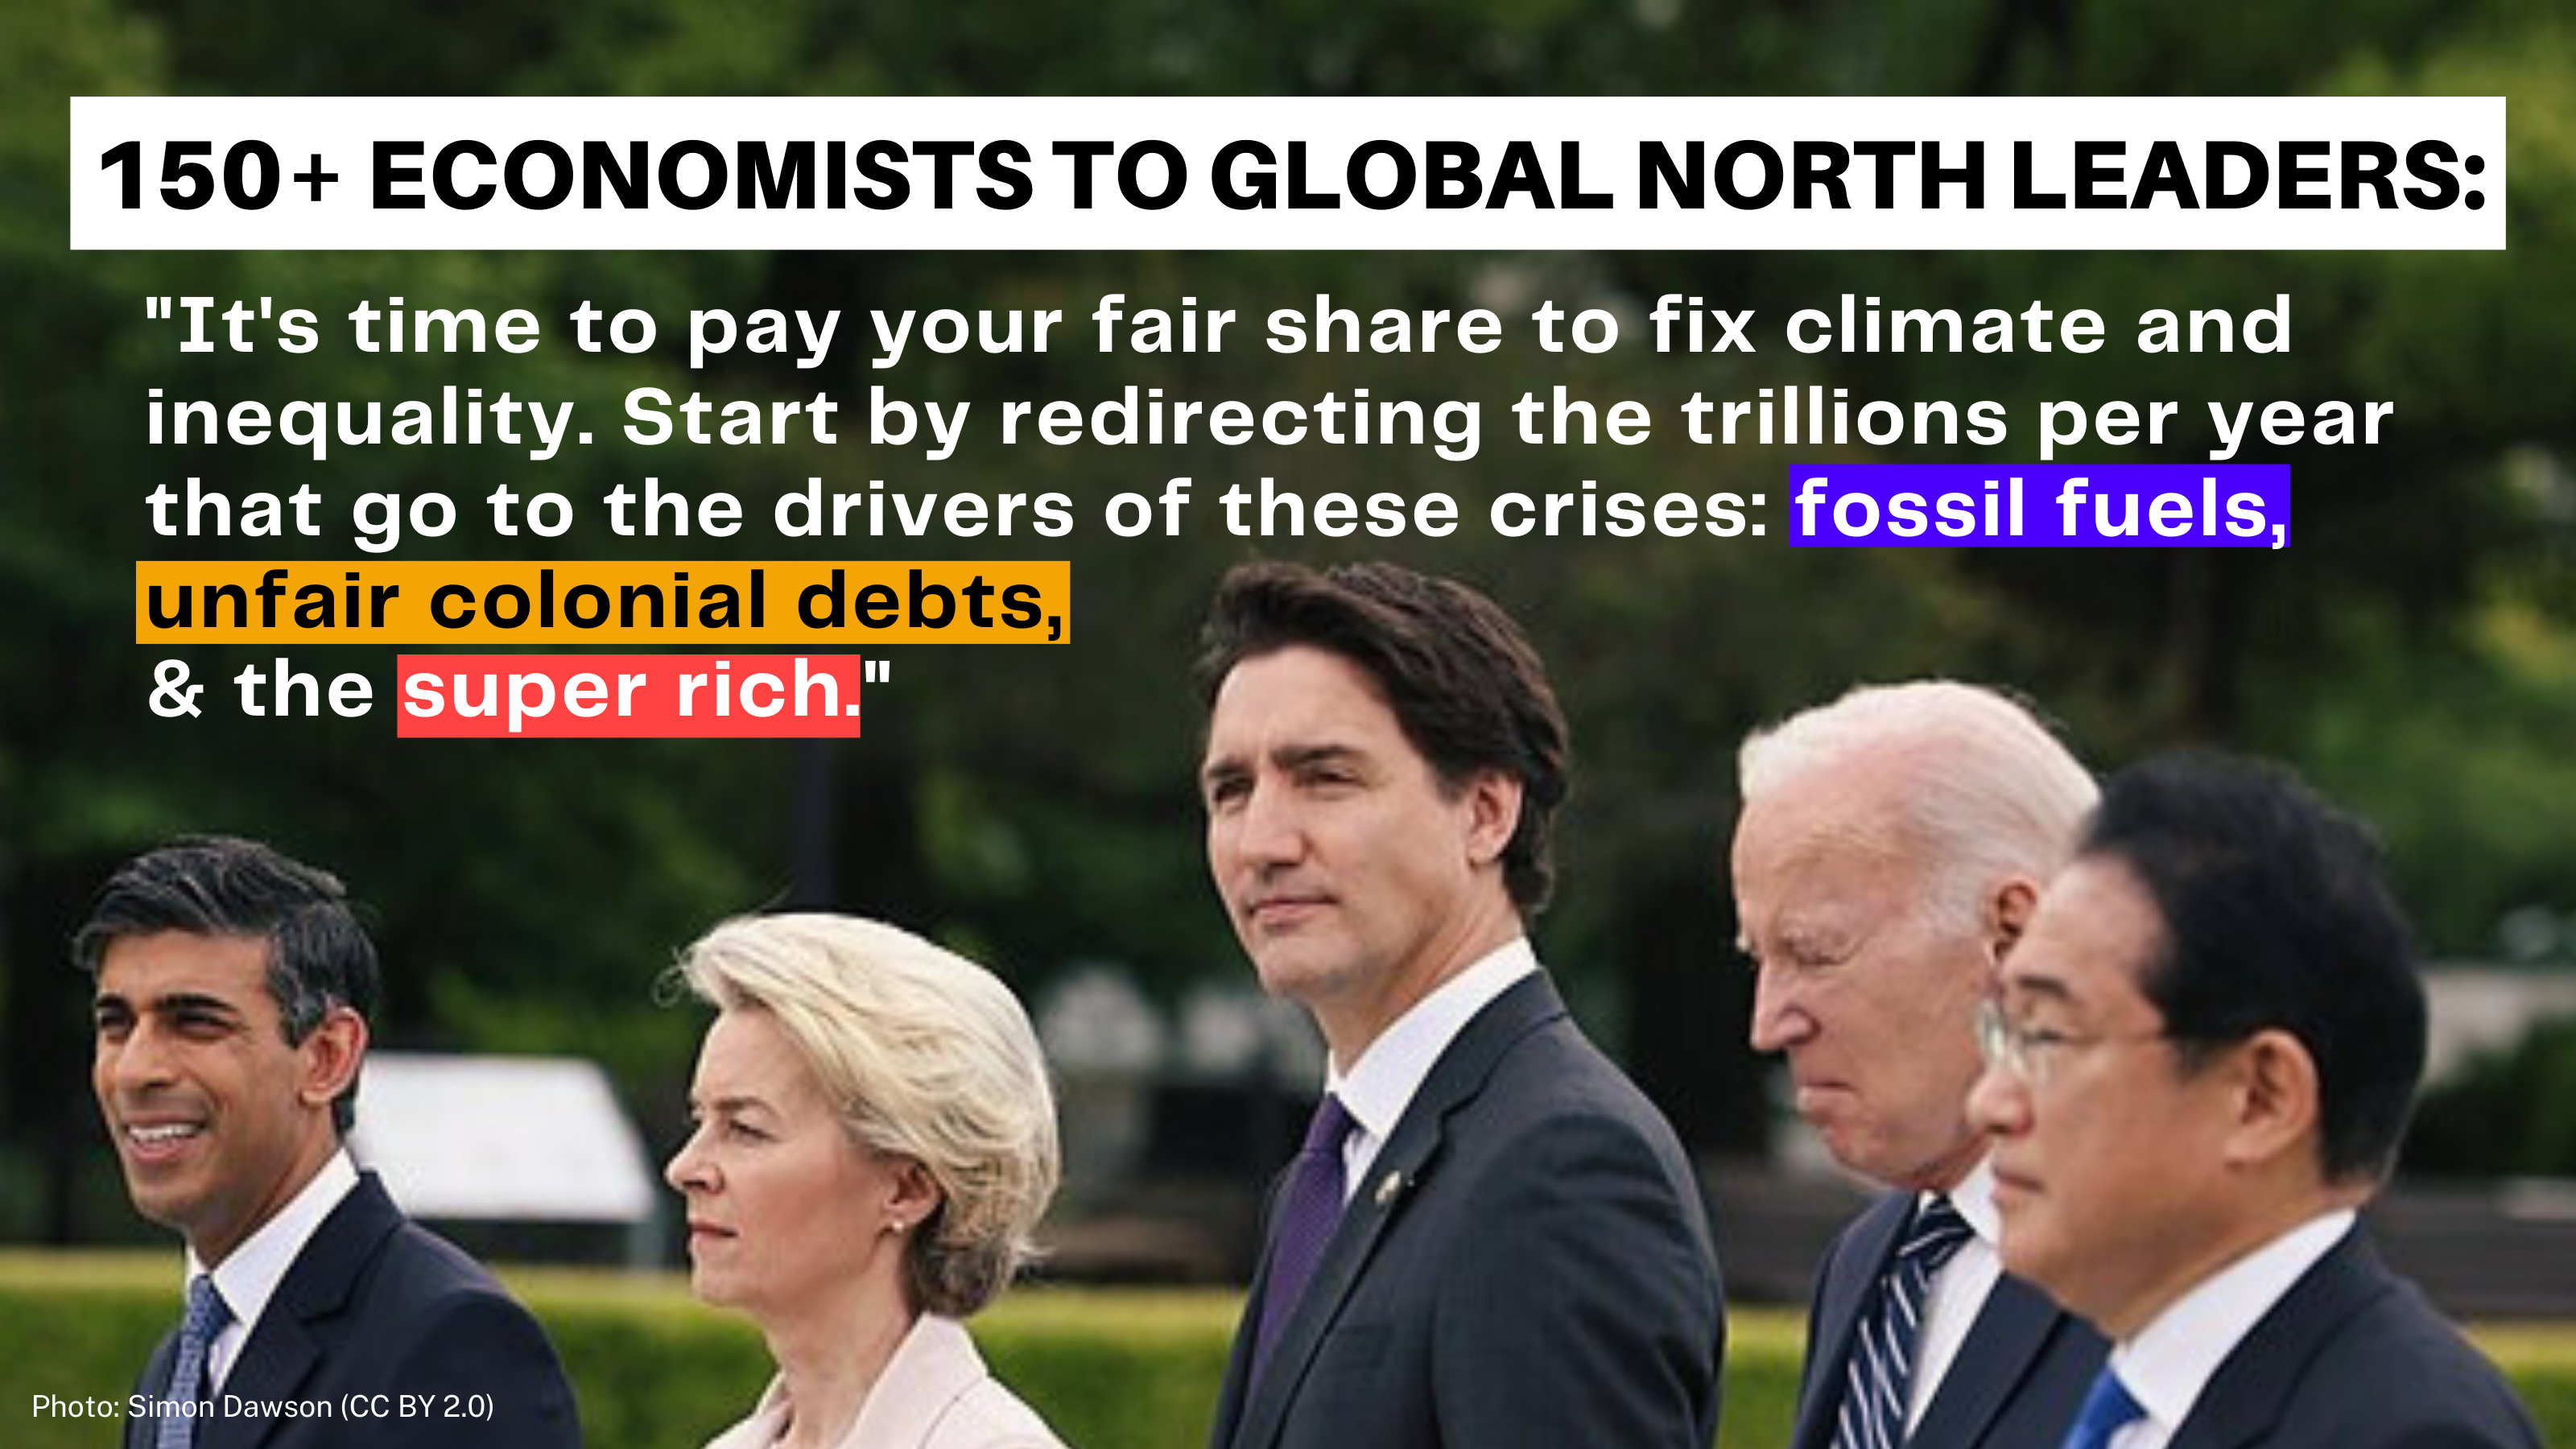 Letter: Global North leaders must redirect trillions from fossils, debt, and the 1% to address global crises